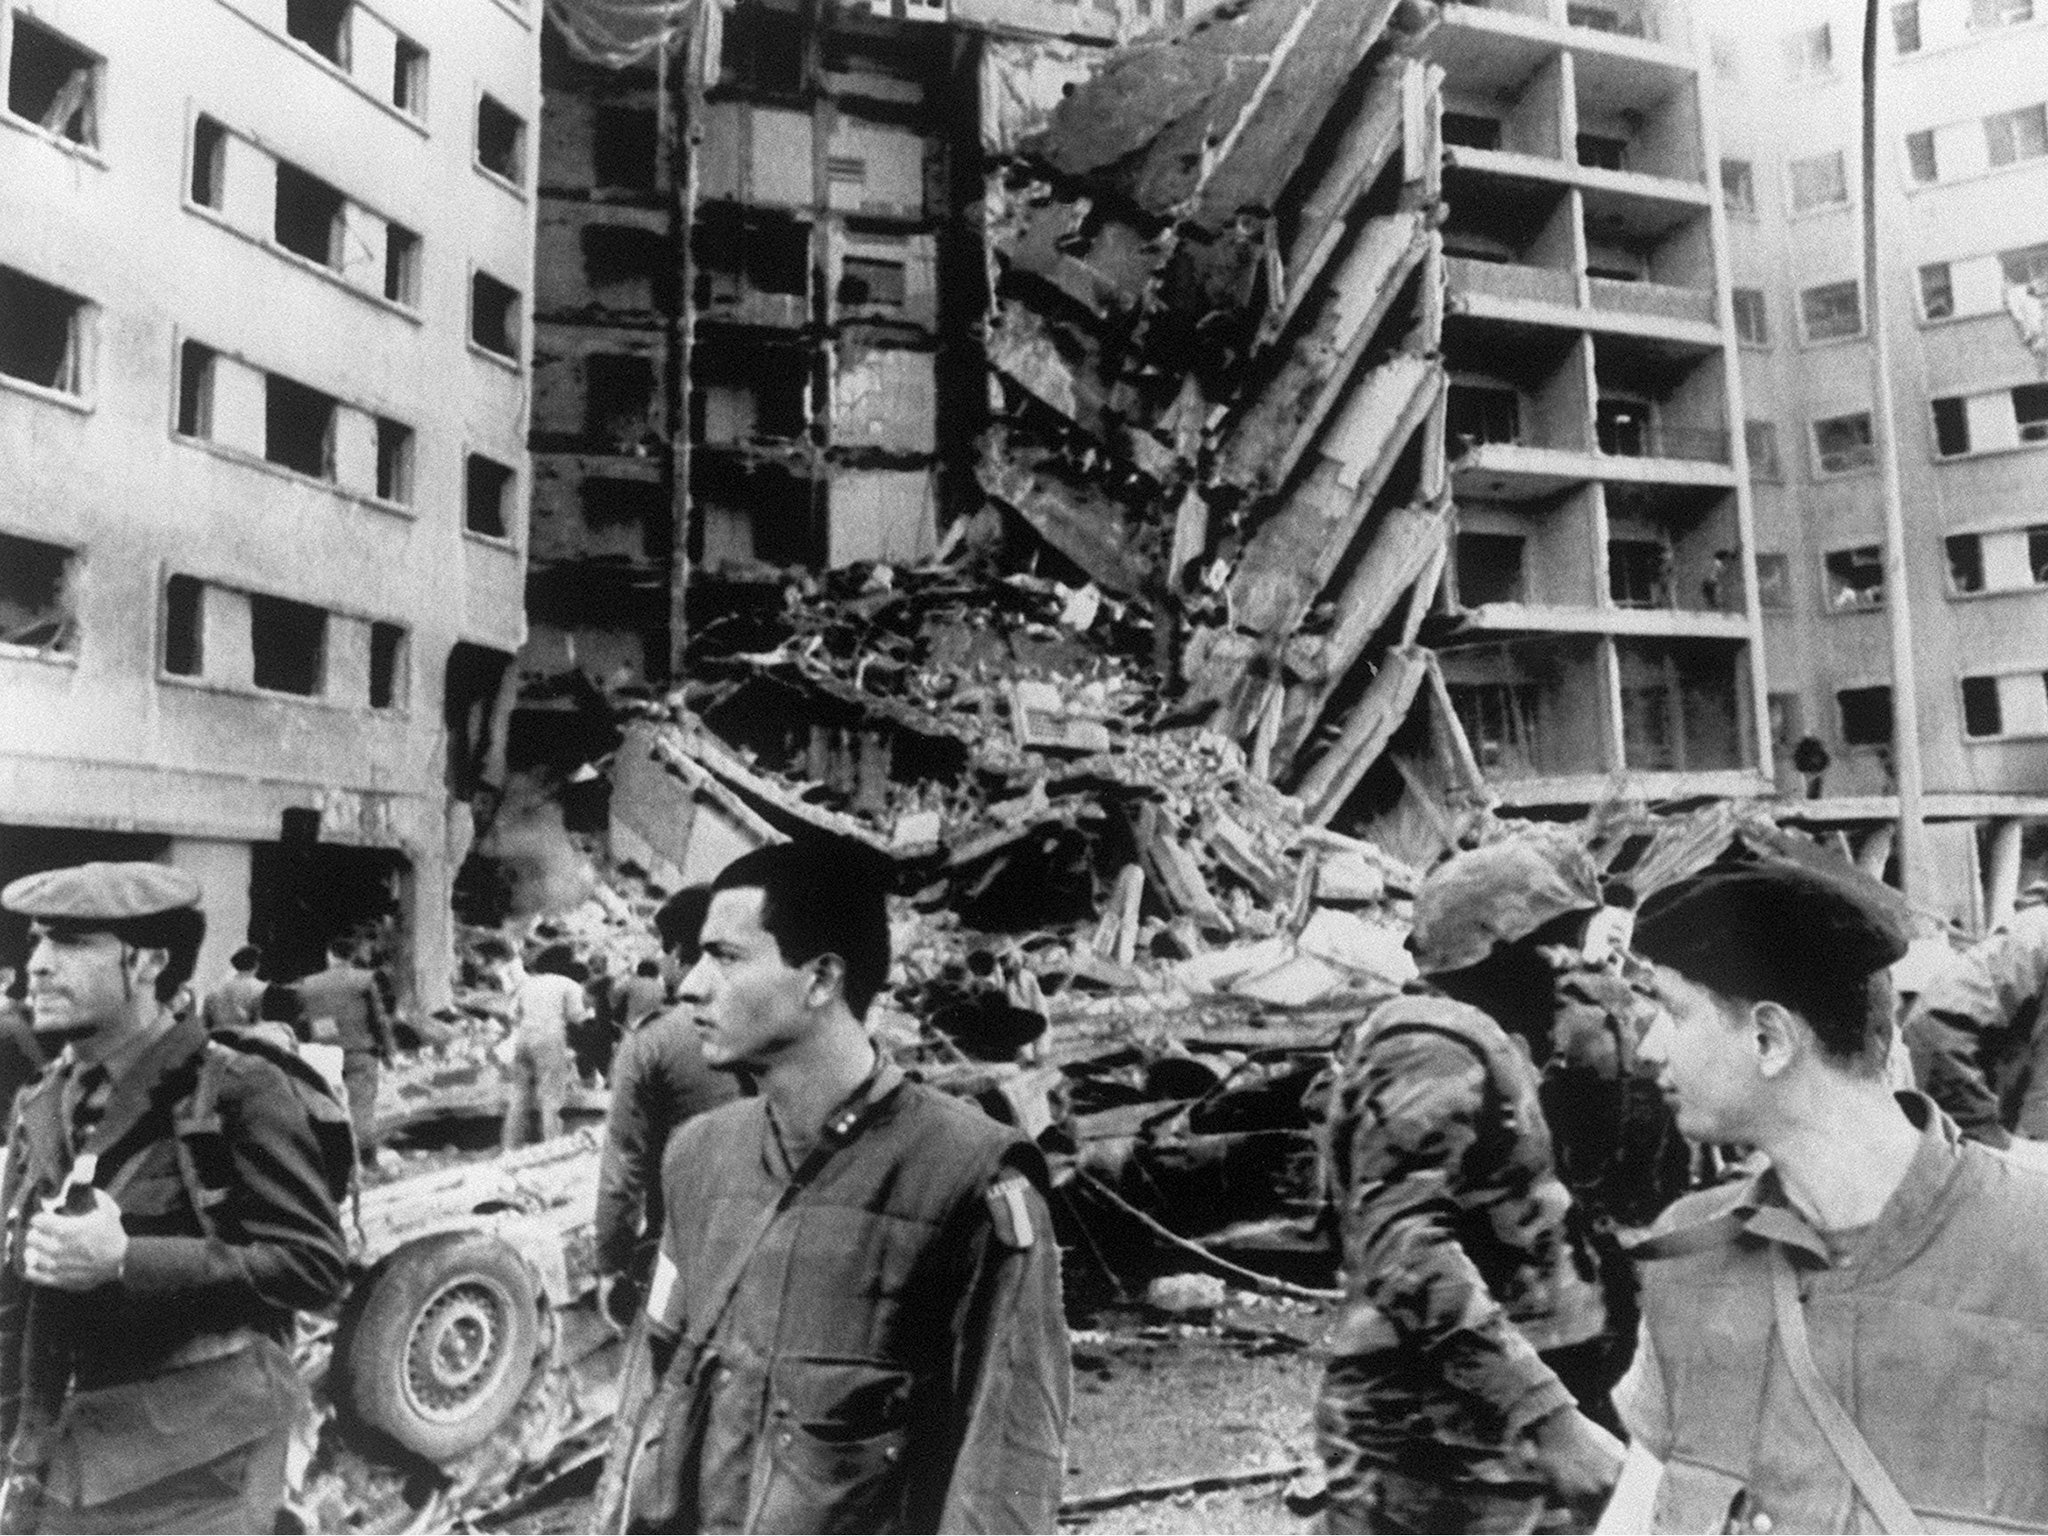 The destroyed section of the US embassy in Beirut following the 1983 bombing